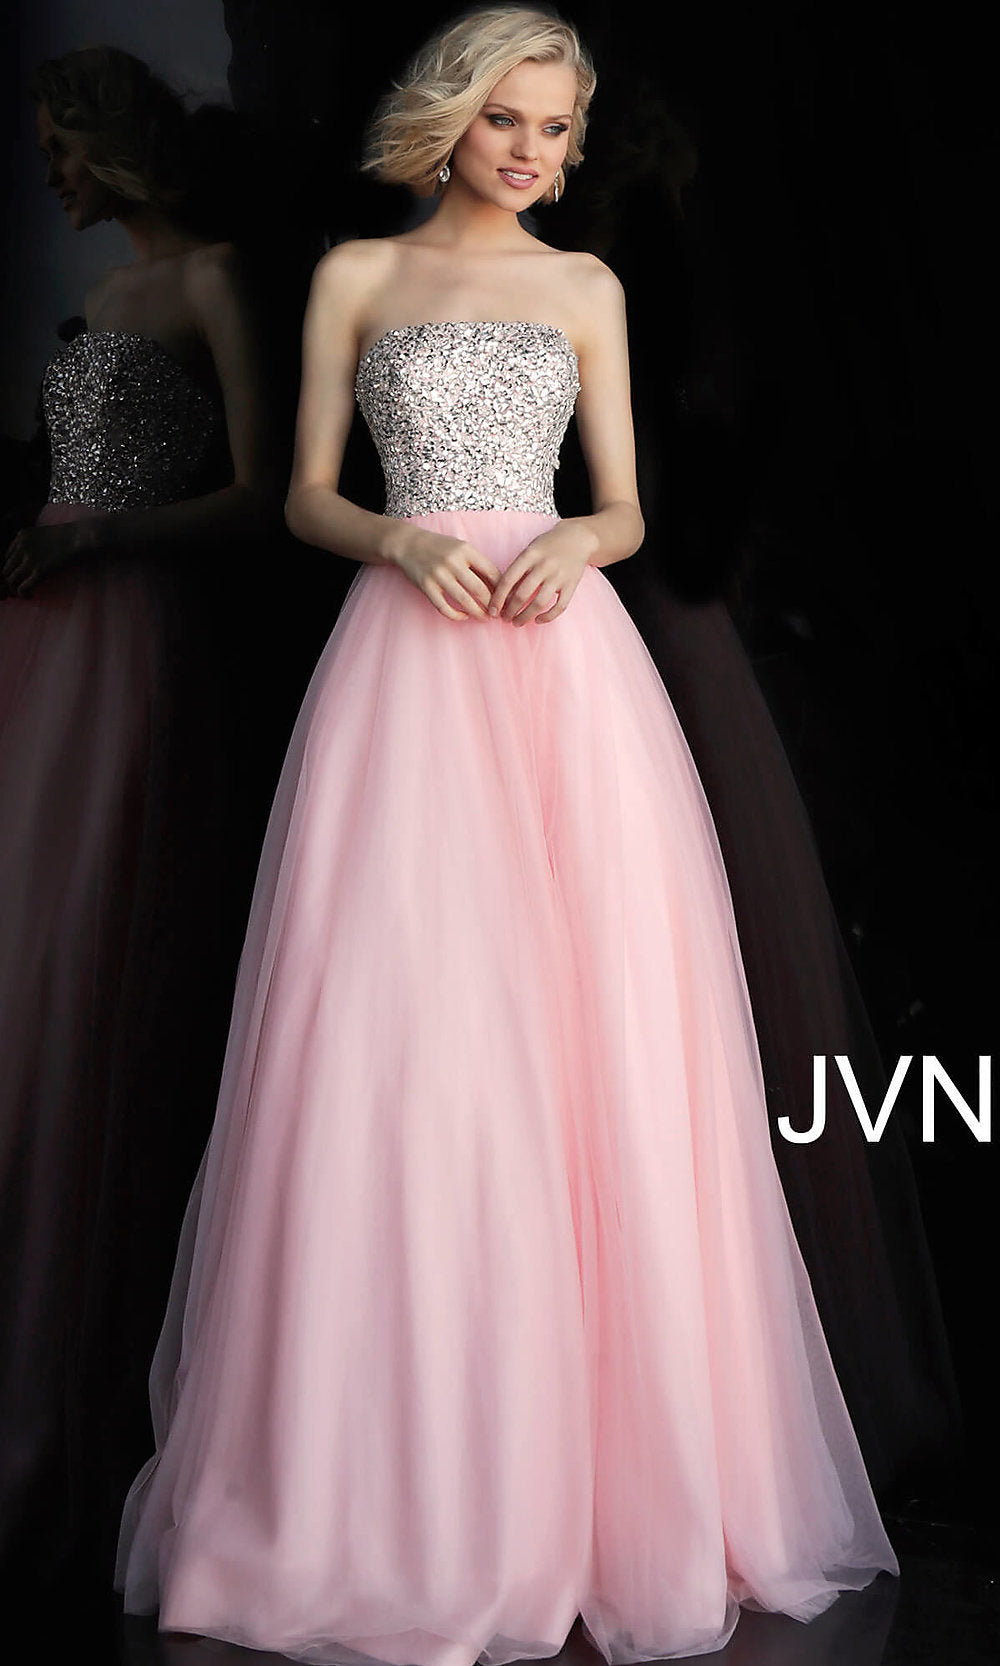 JVN by Jovani Pink Long Ball Gown Prom Dress -PromGirl